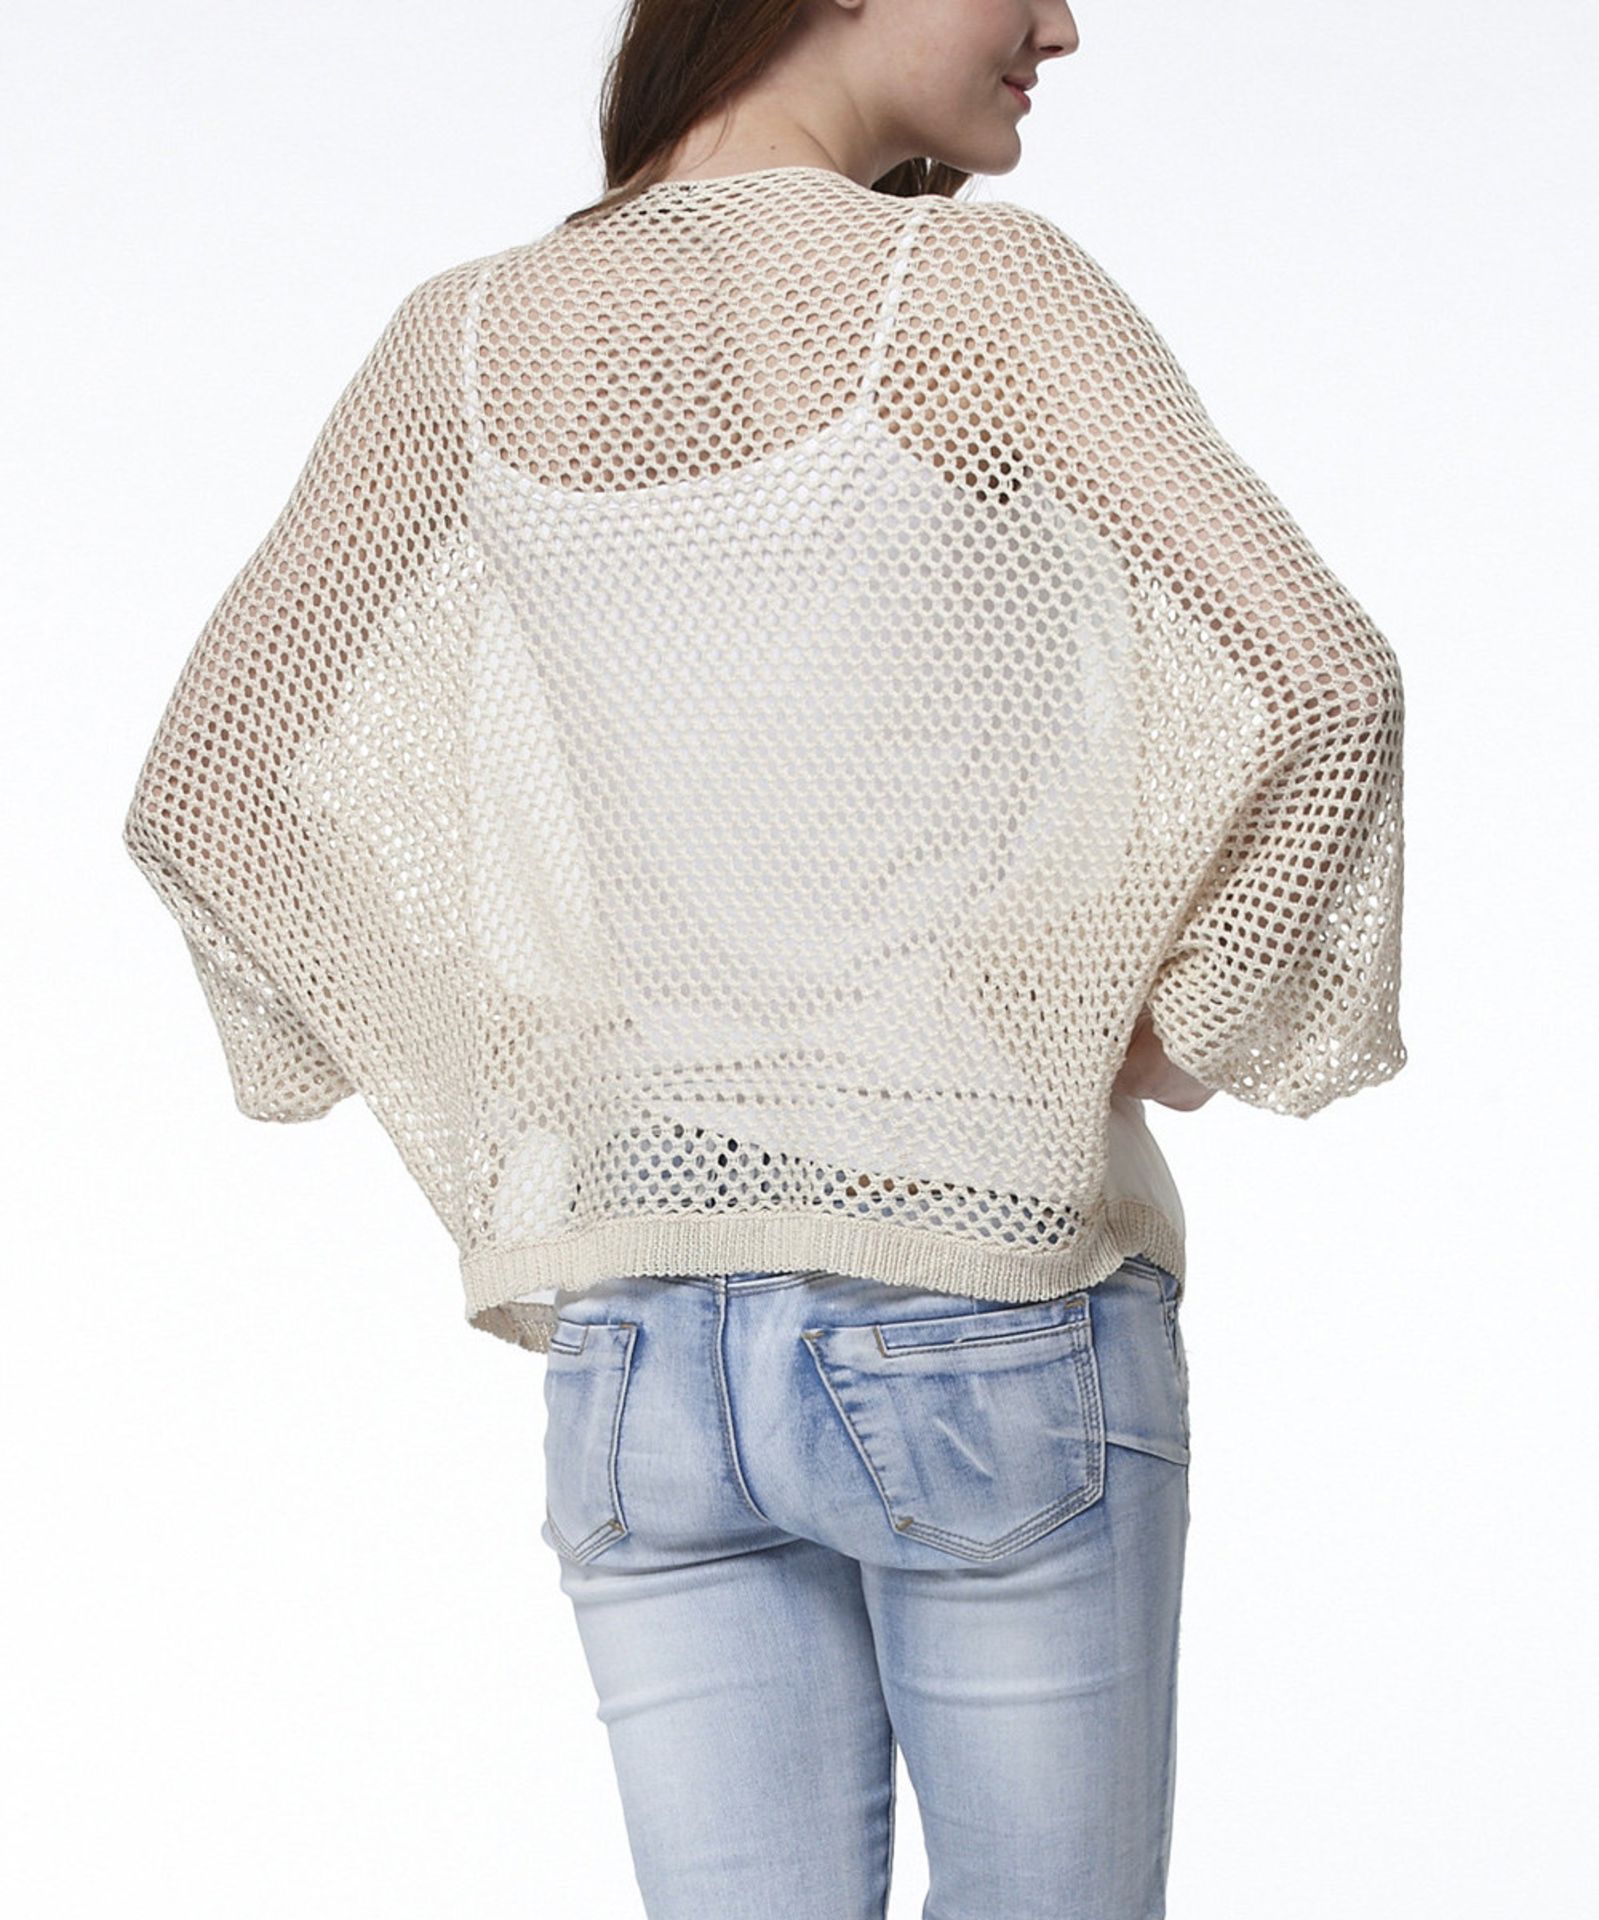 Simply Couture Beige Leaf Semisheer Top (Us Size: Xl) [Ref: 32593188] - Image 3 of 4